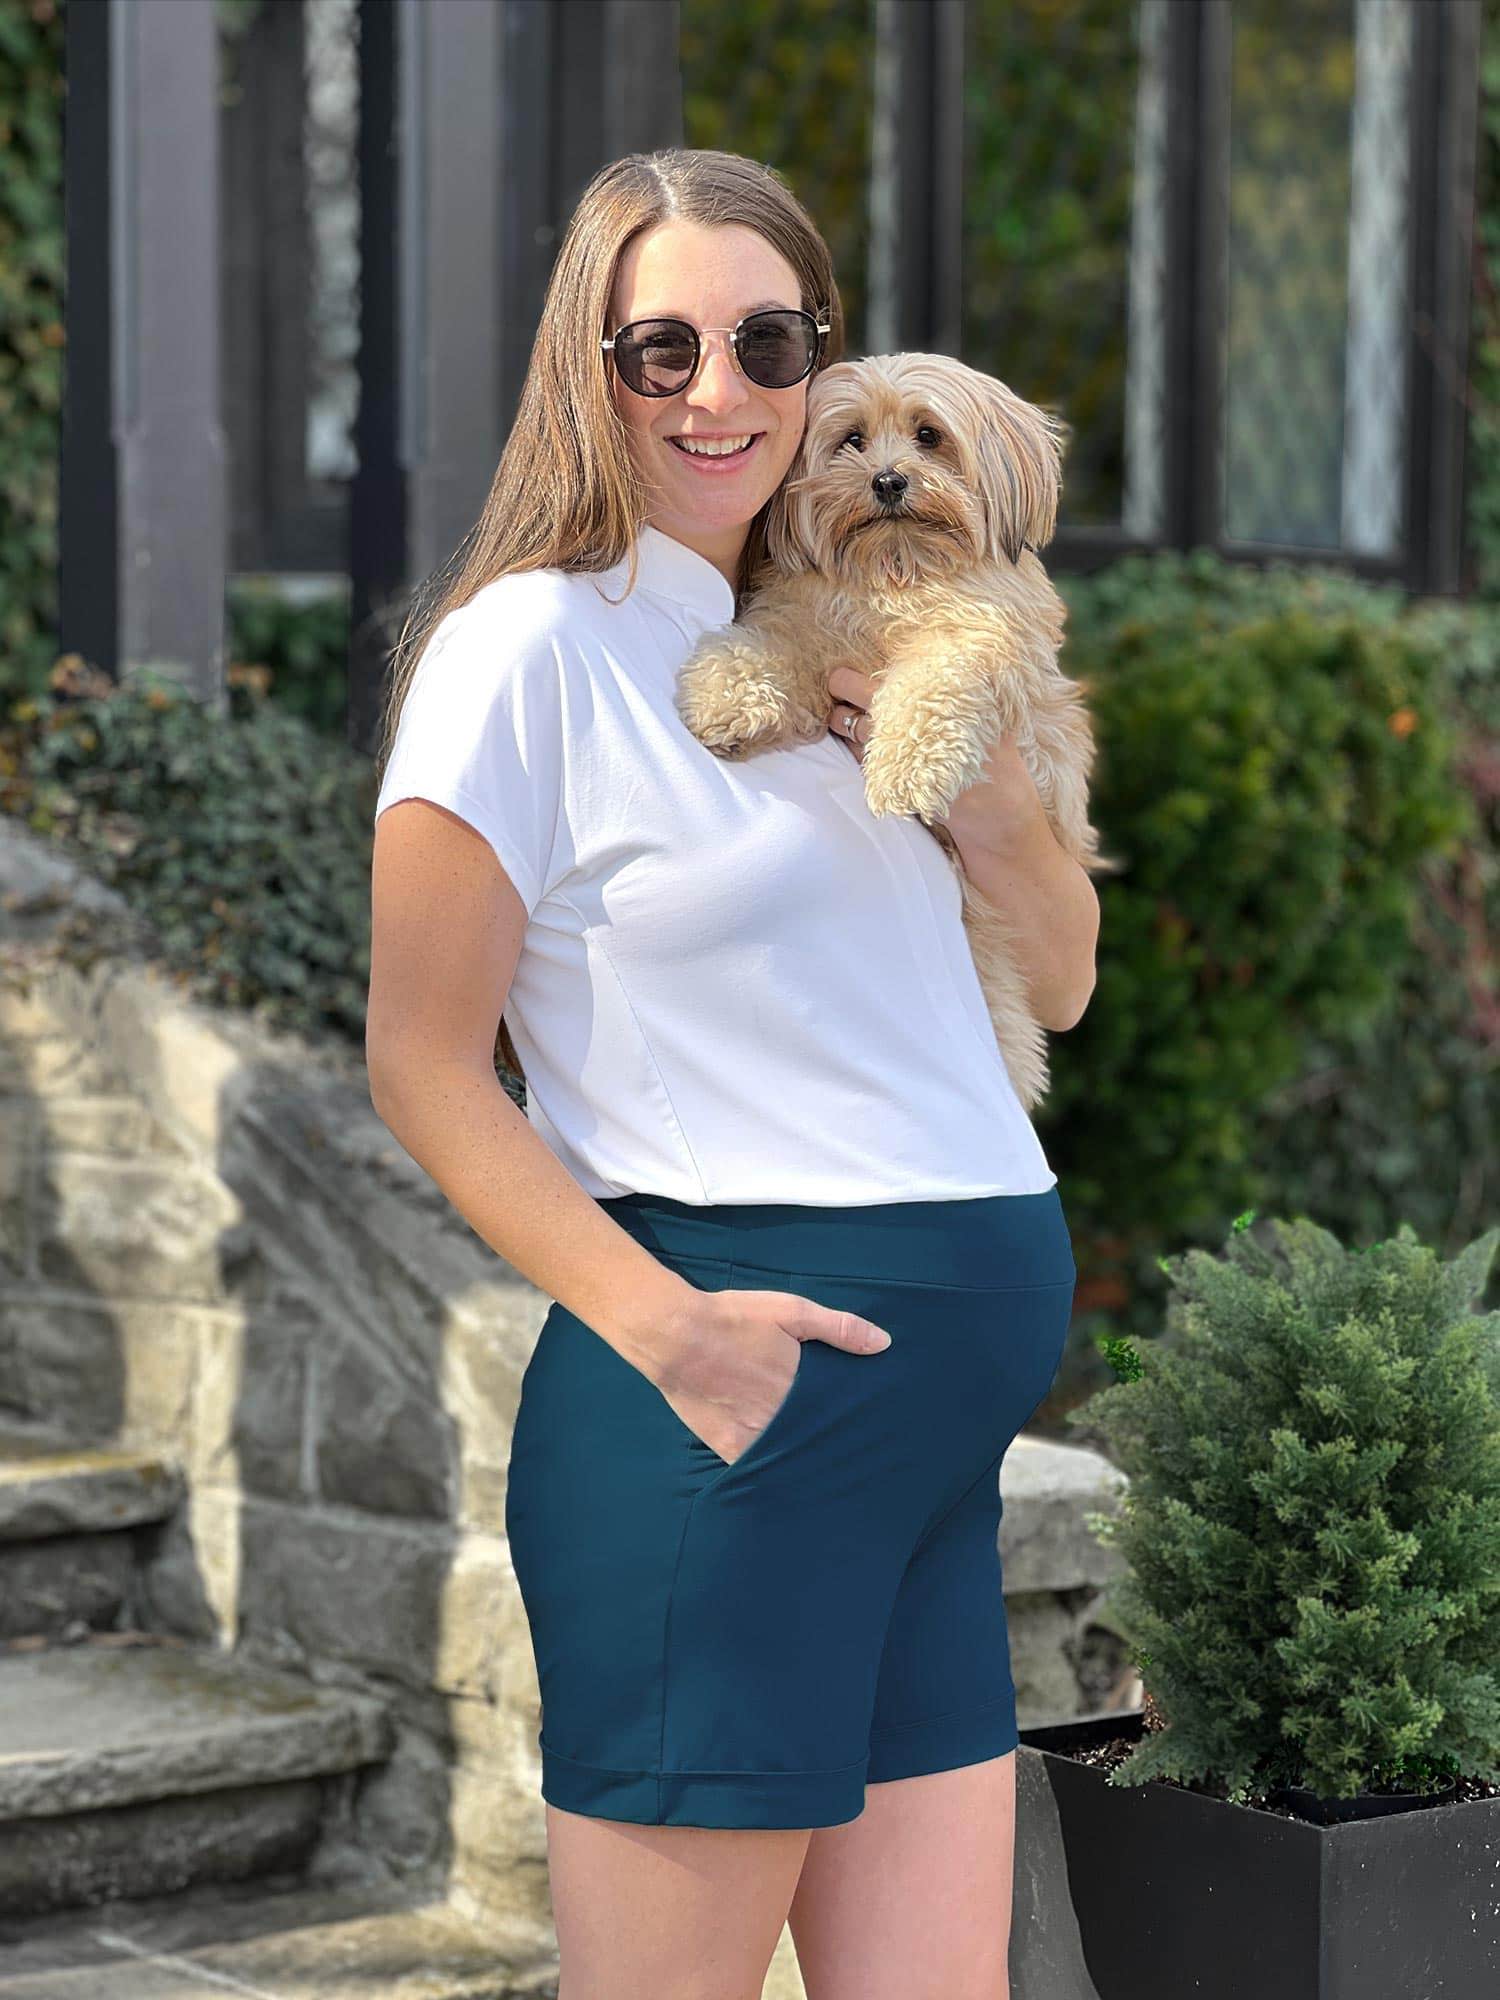 Pregnant woman standing wearing Miik's Leland everyday dressy short in navy with a white top and holding a dog.